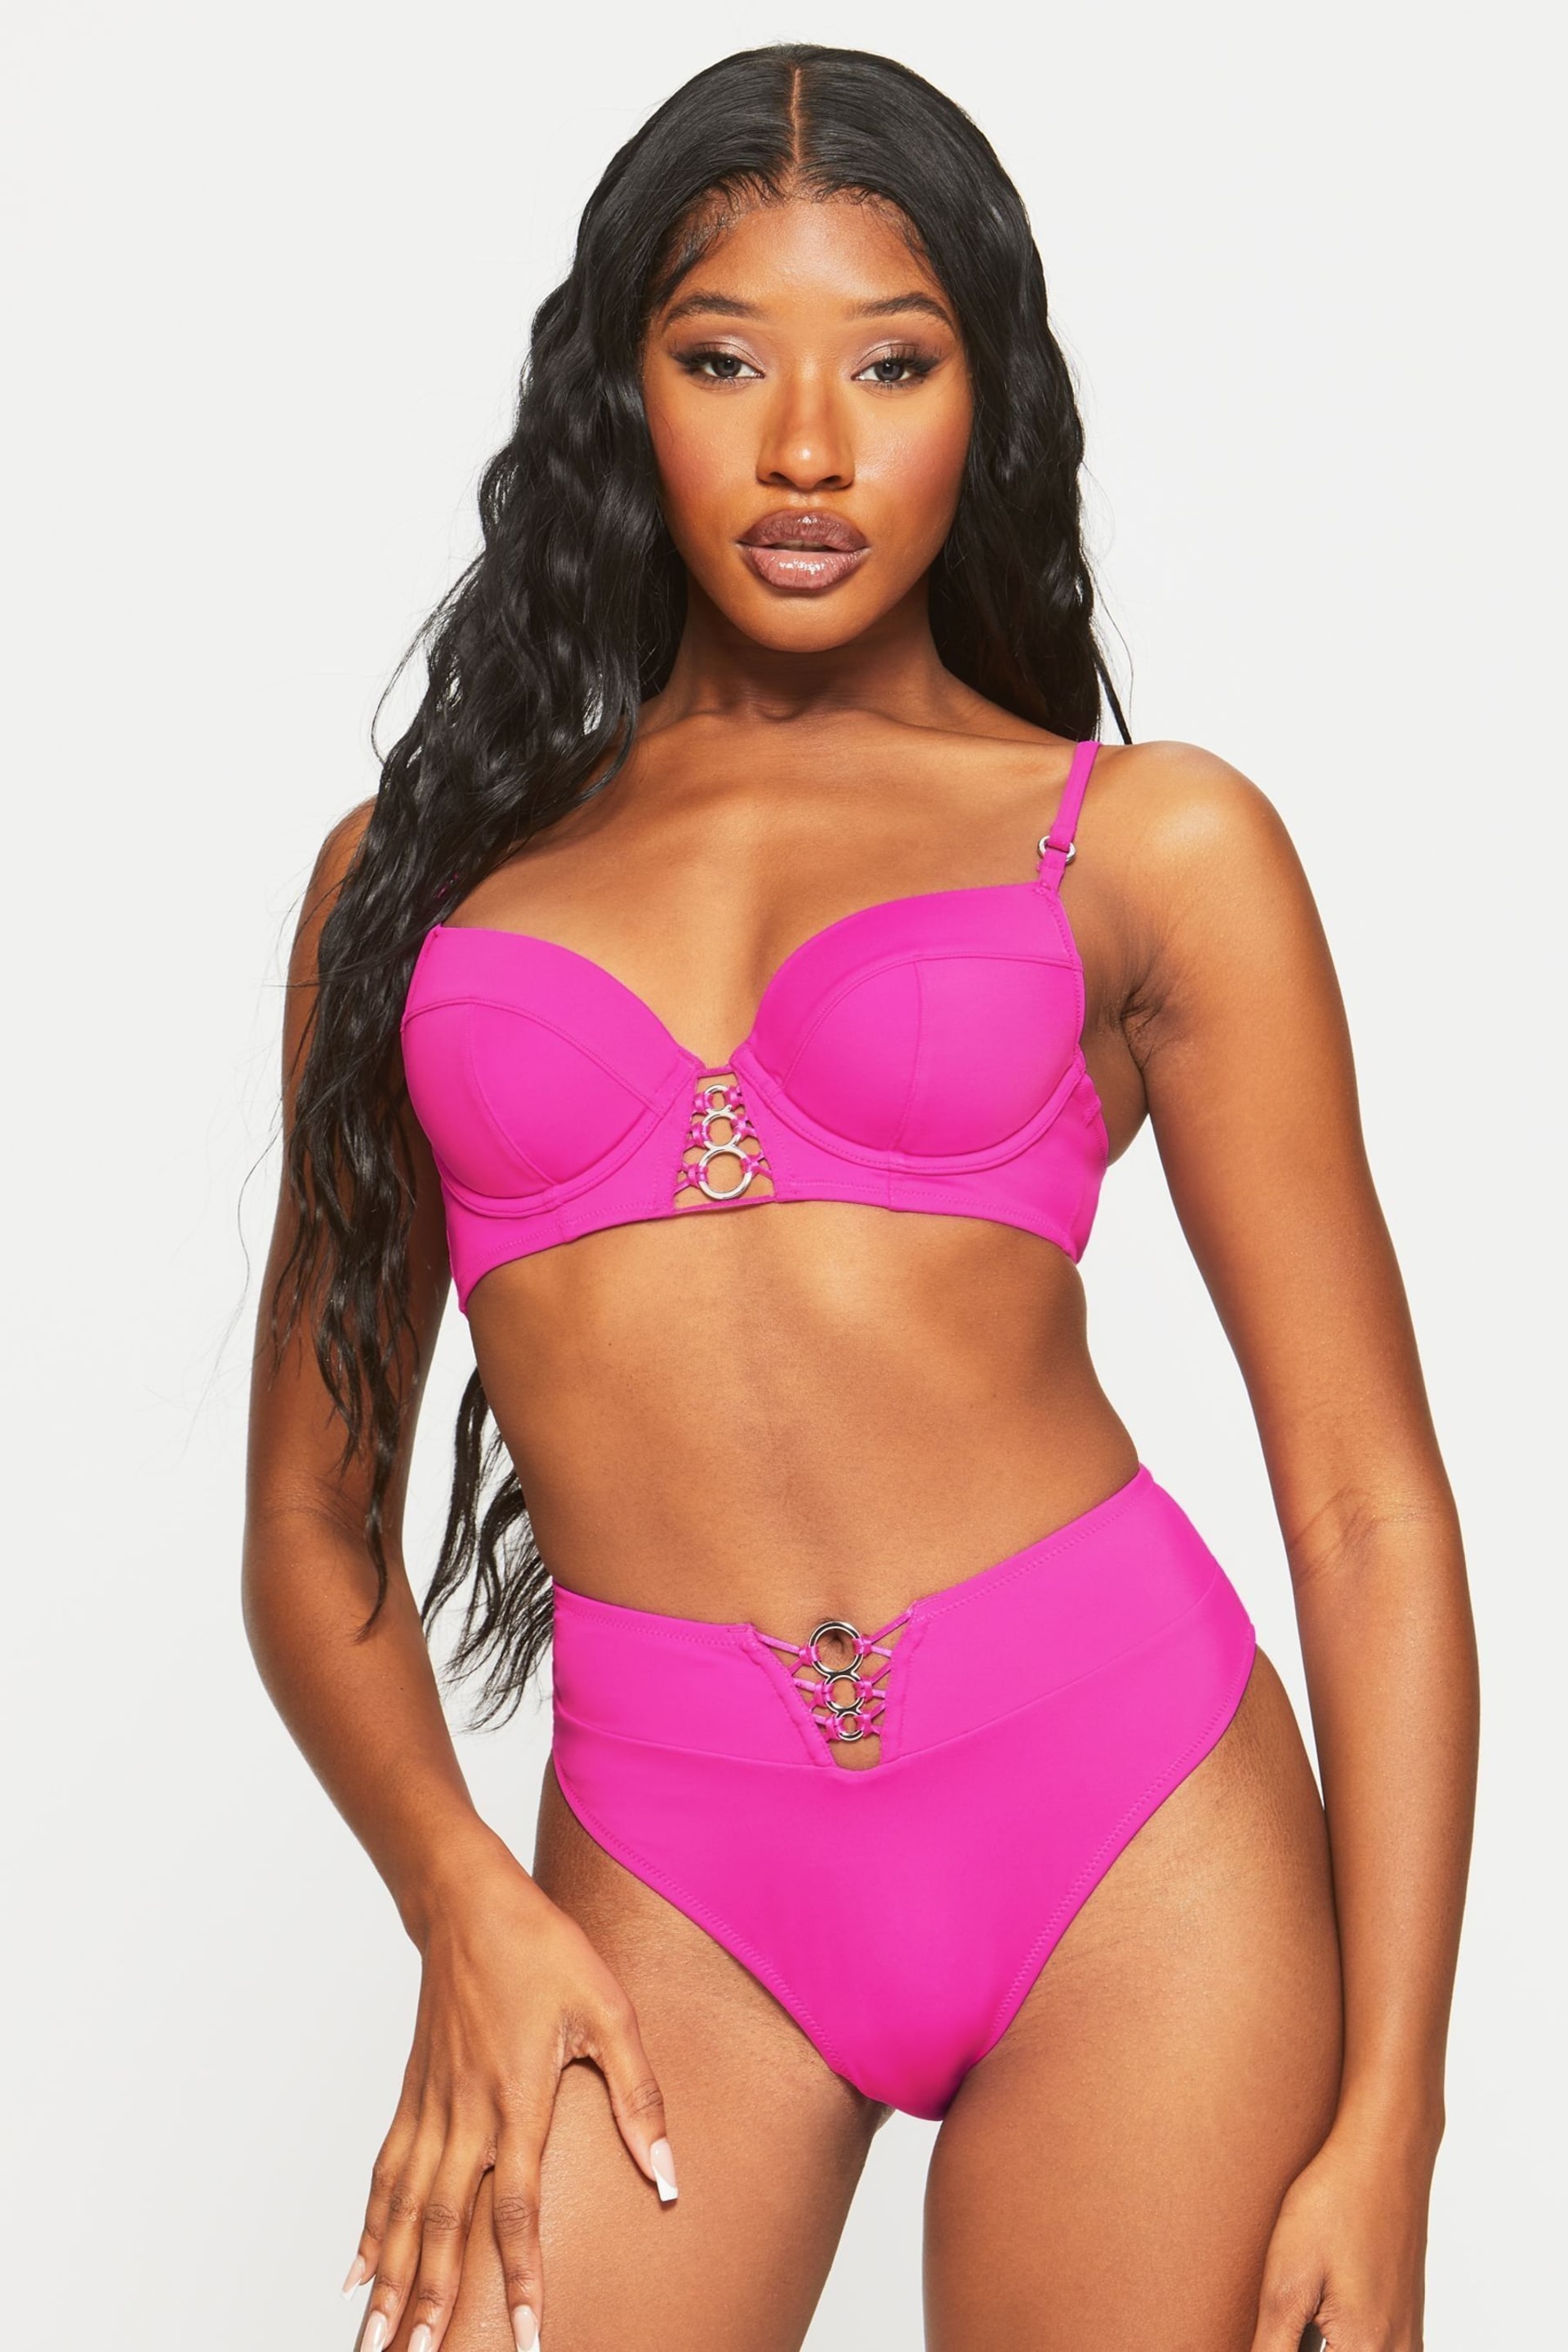 Ann Summers Bright Pink Miami Dreams High-Waisted Bikini Bottoms - Image 1 of 5